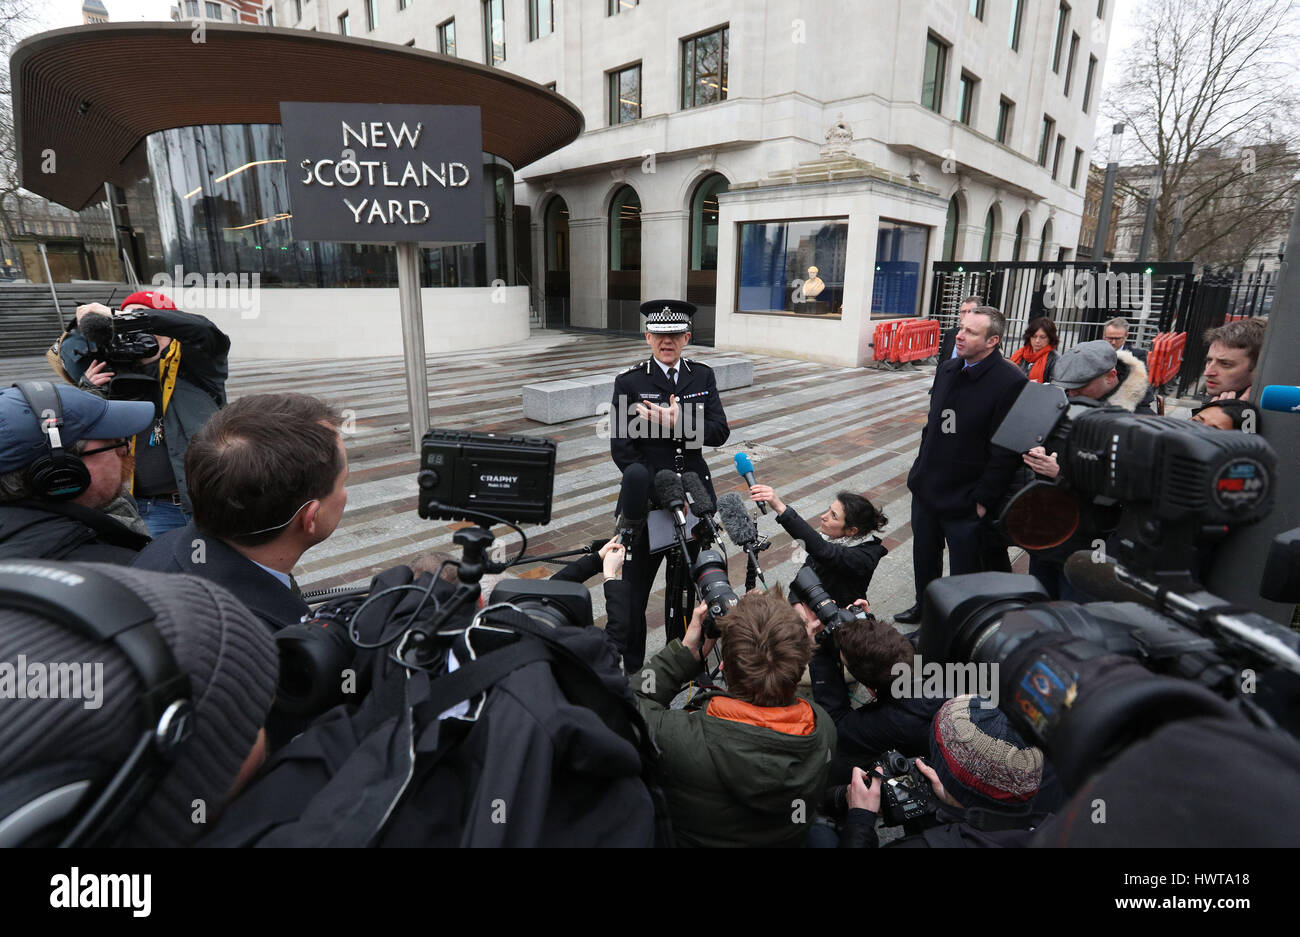 Mark Rowley, Assistant Commissioner for Specialist Operations in the Metropolitan Police, speaking outside Scotland Yard in London, the day after a terrorist attack where police officer Keith Palmer and three members of the public died and the attacker was shot dead. Stock Photo